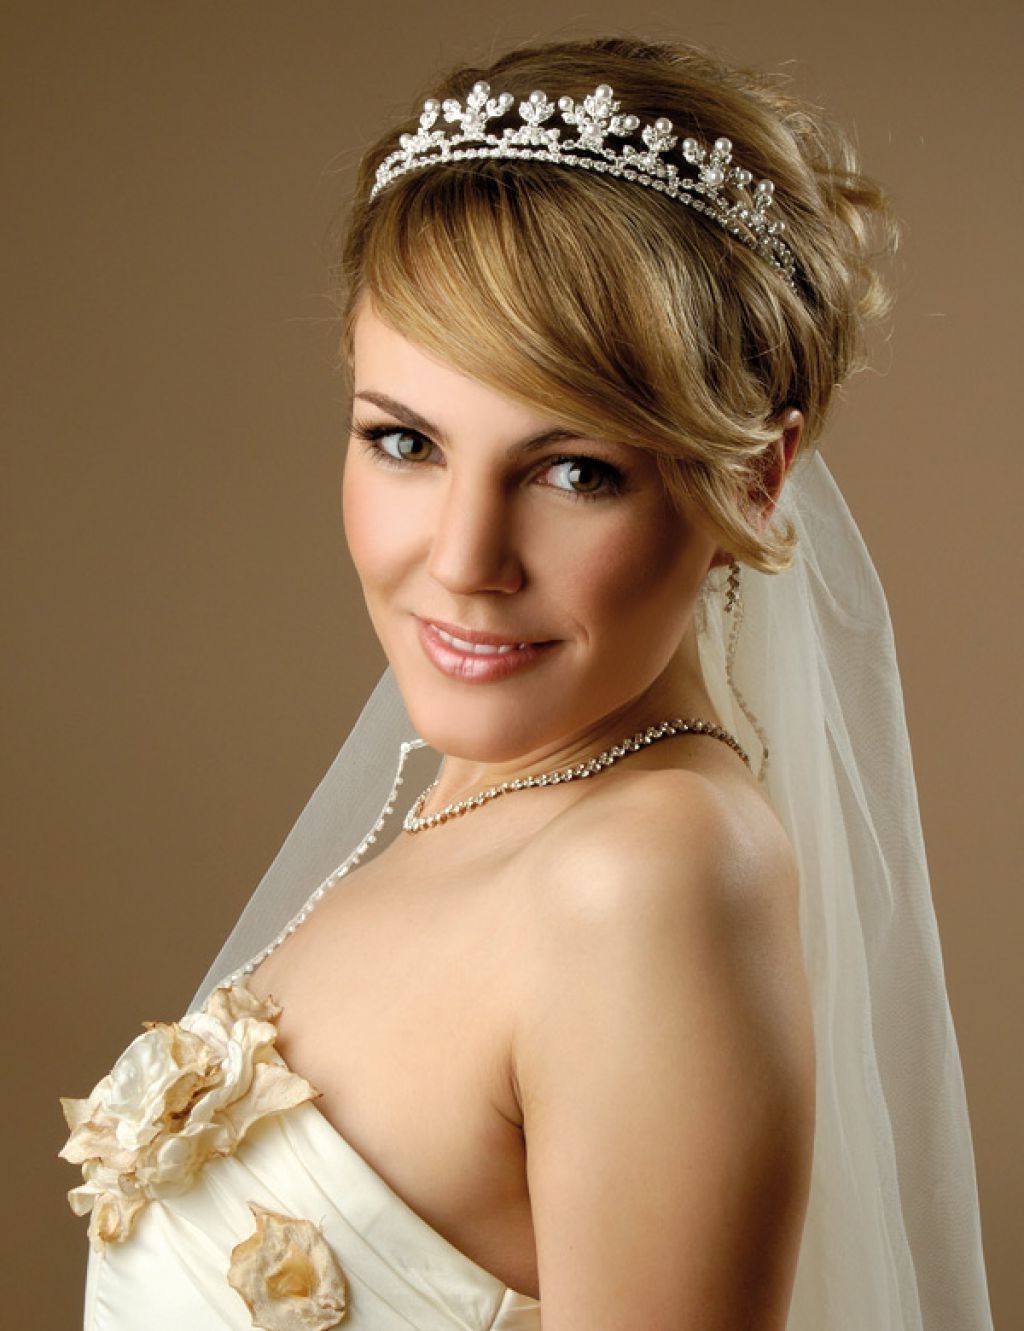 Short Bridal Hairstyles With Veil – Hairstyle For Women & Man Inside Fashionable Wedding Hairstyles For Short Hair With Veil And Tiara (View 1 of 15)